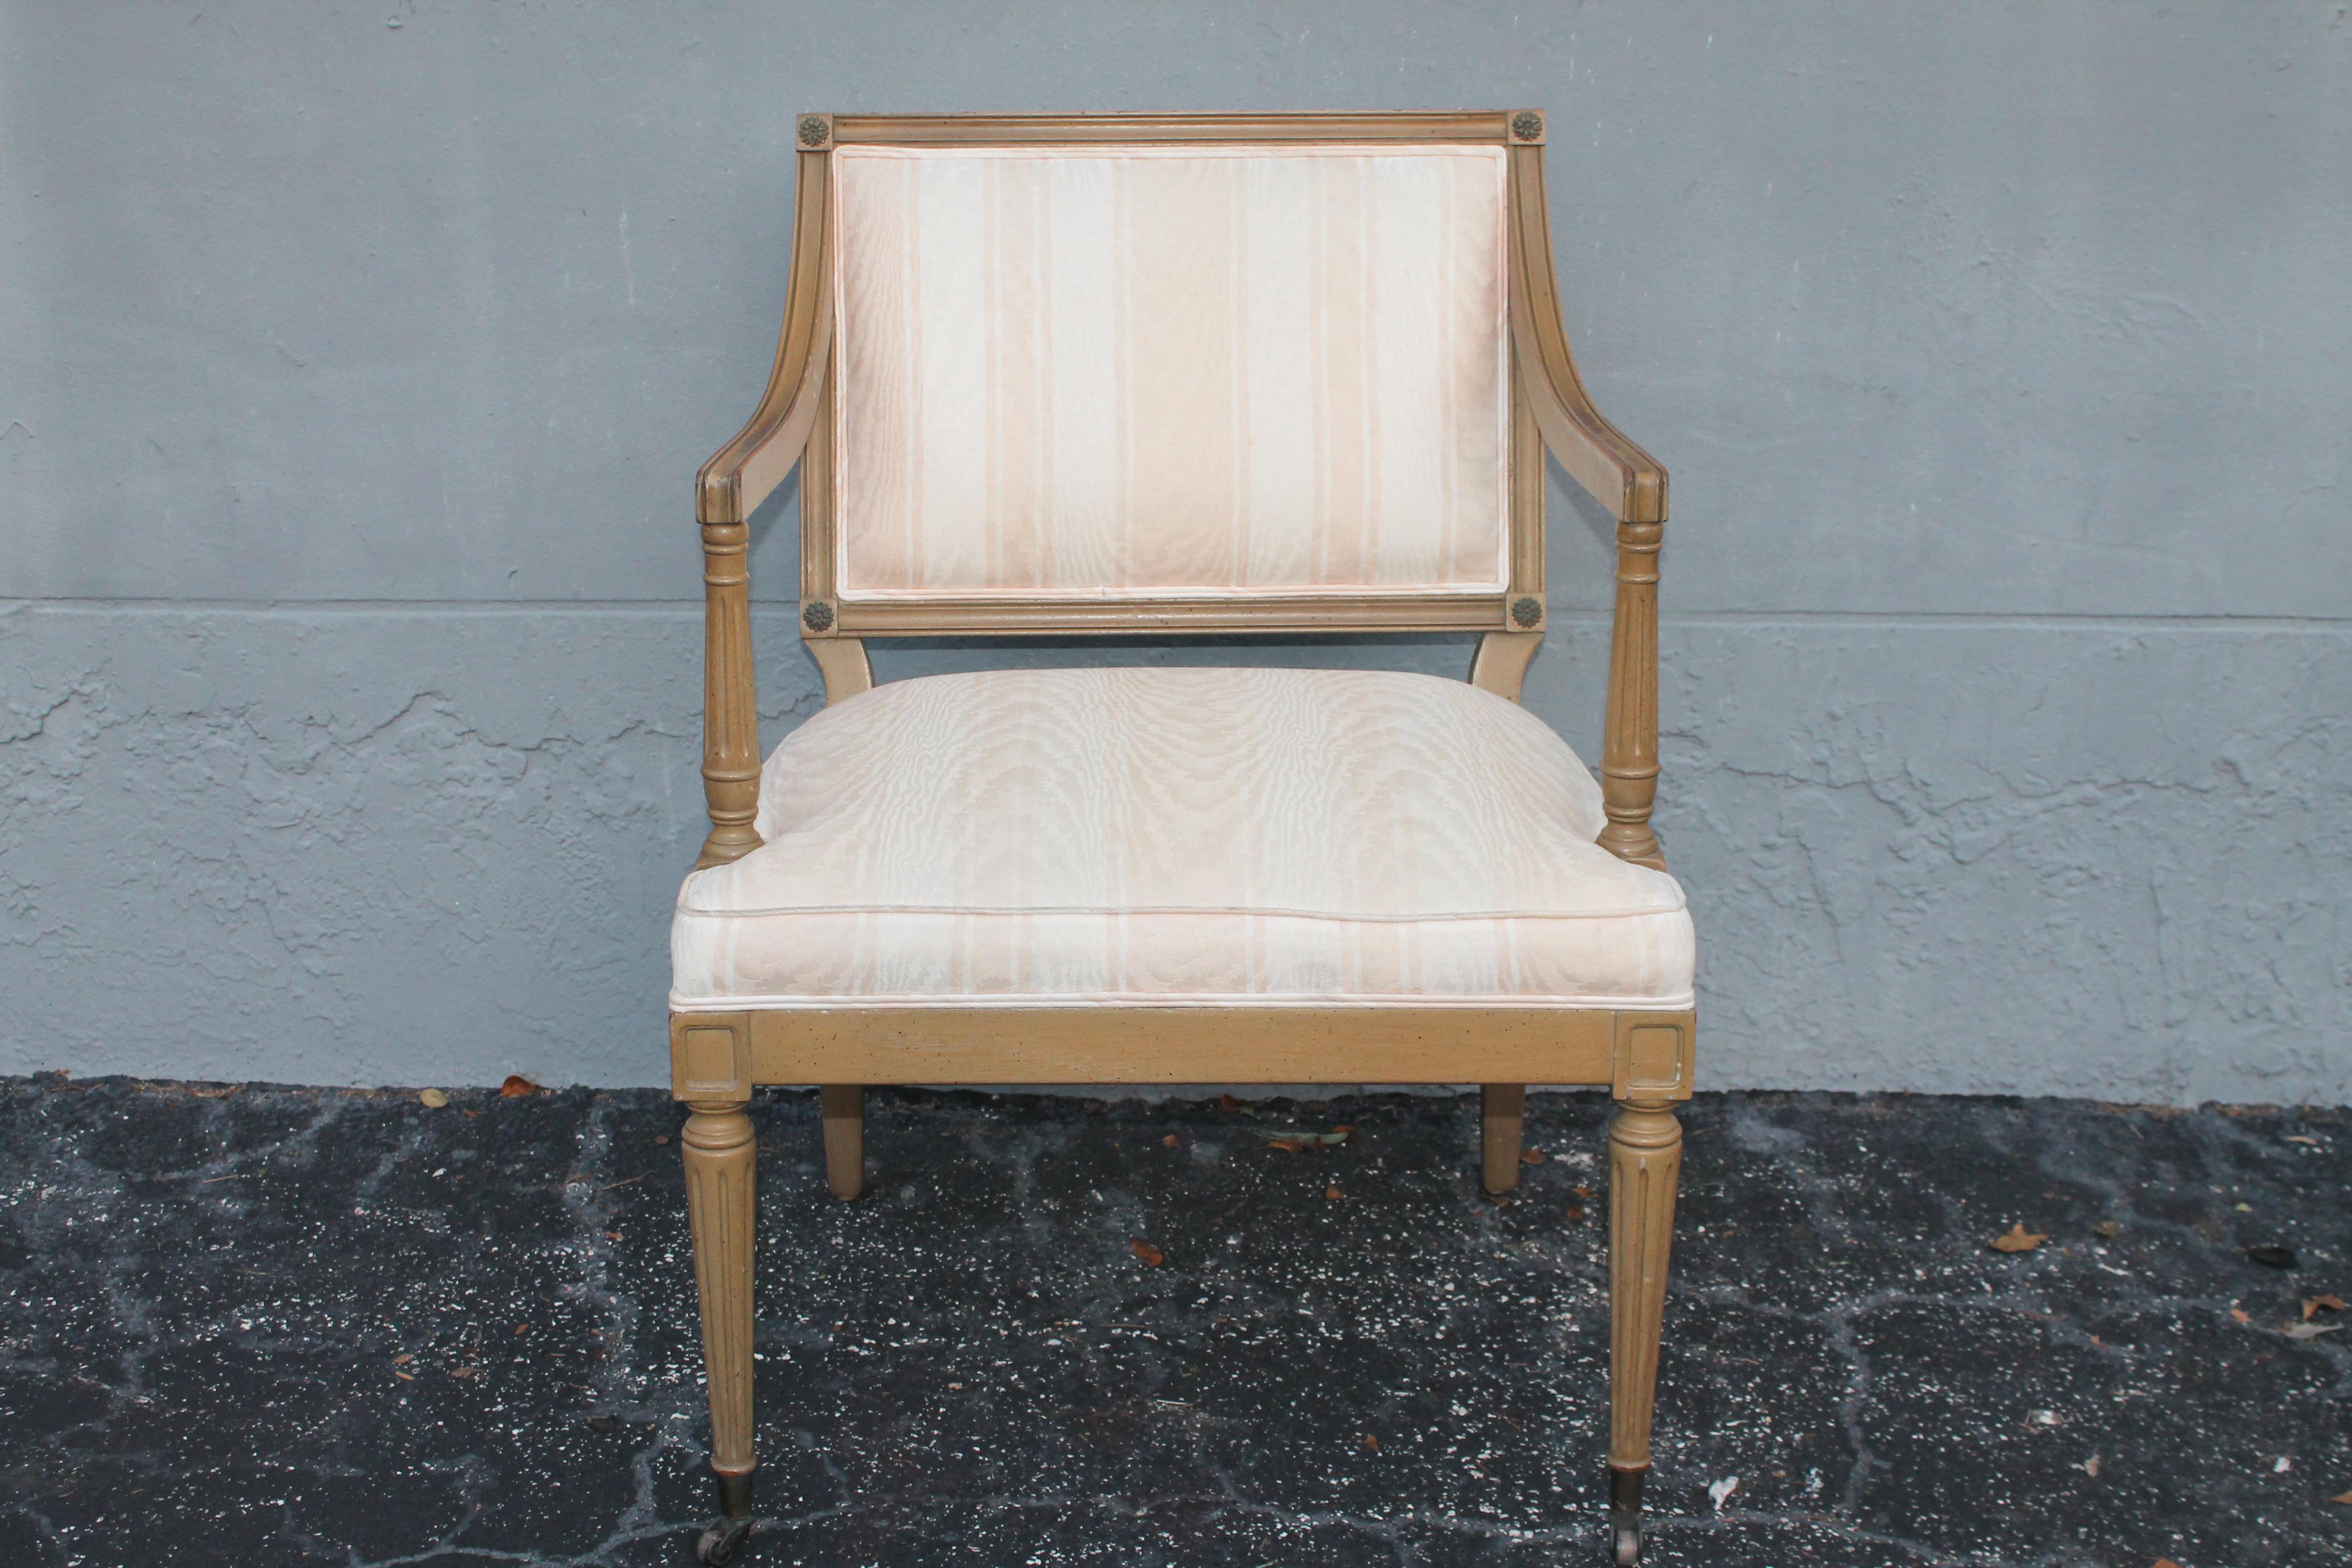 Very High Quality Arm Chair by John Widdicomb. Front legs have brass wheels. Undulating Textile. Light peach striped fabric. Beautiful quality Chair.